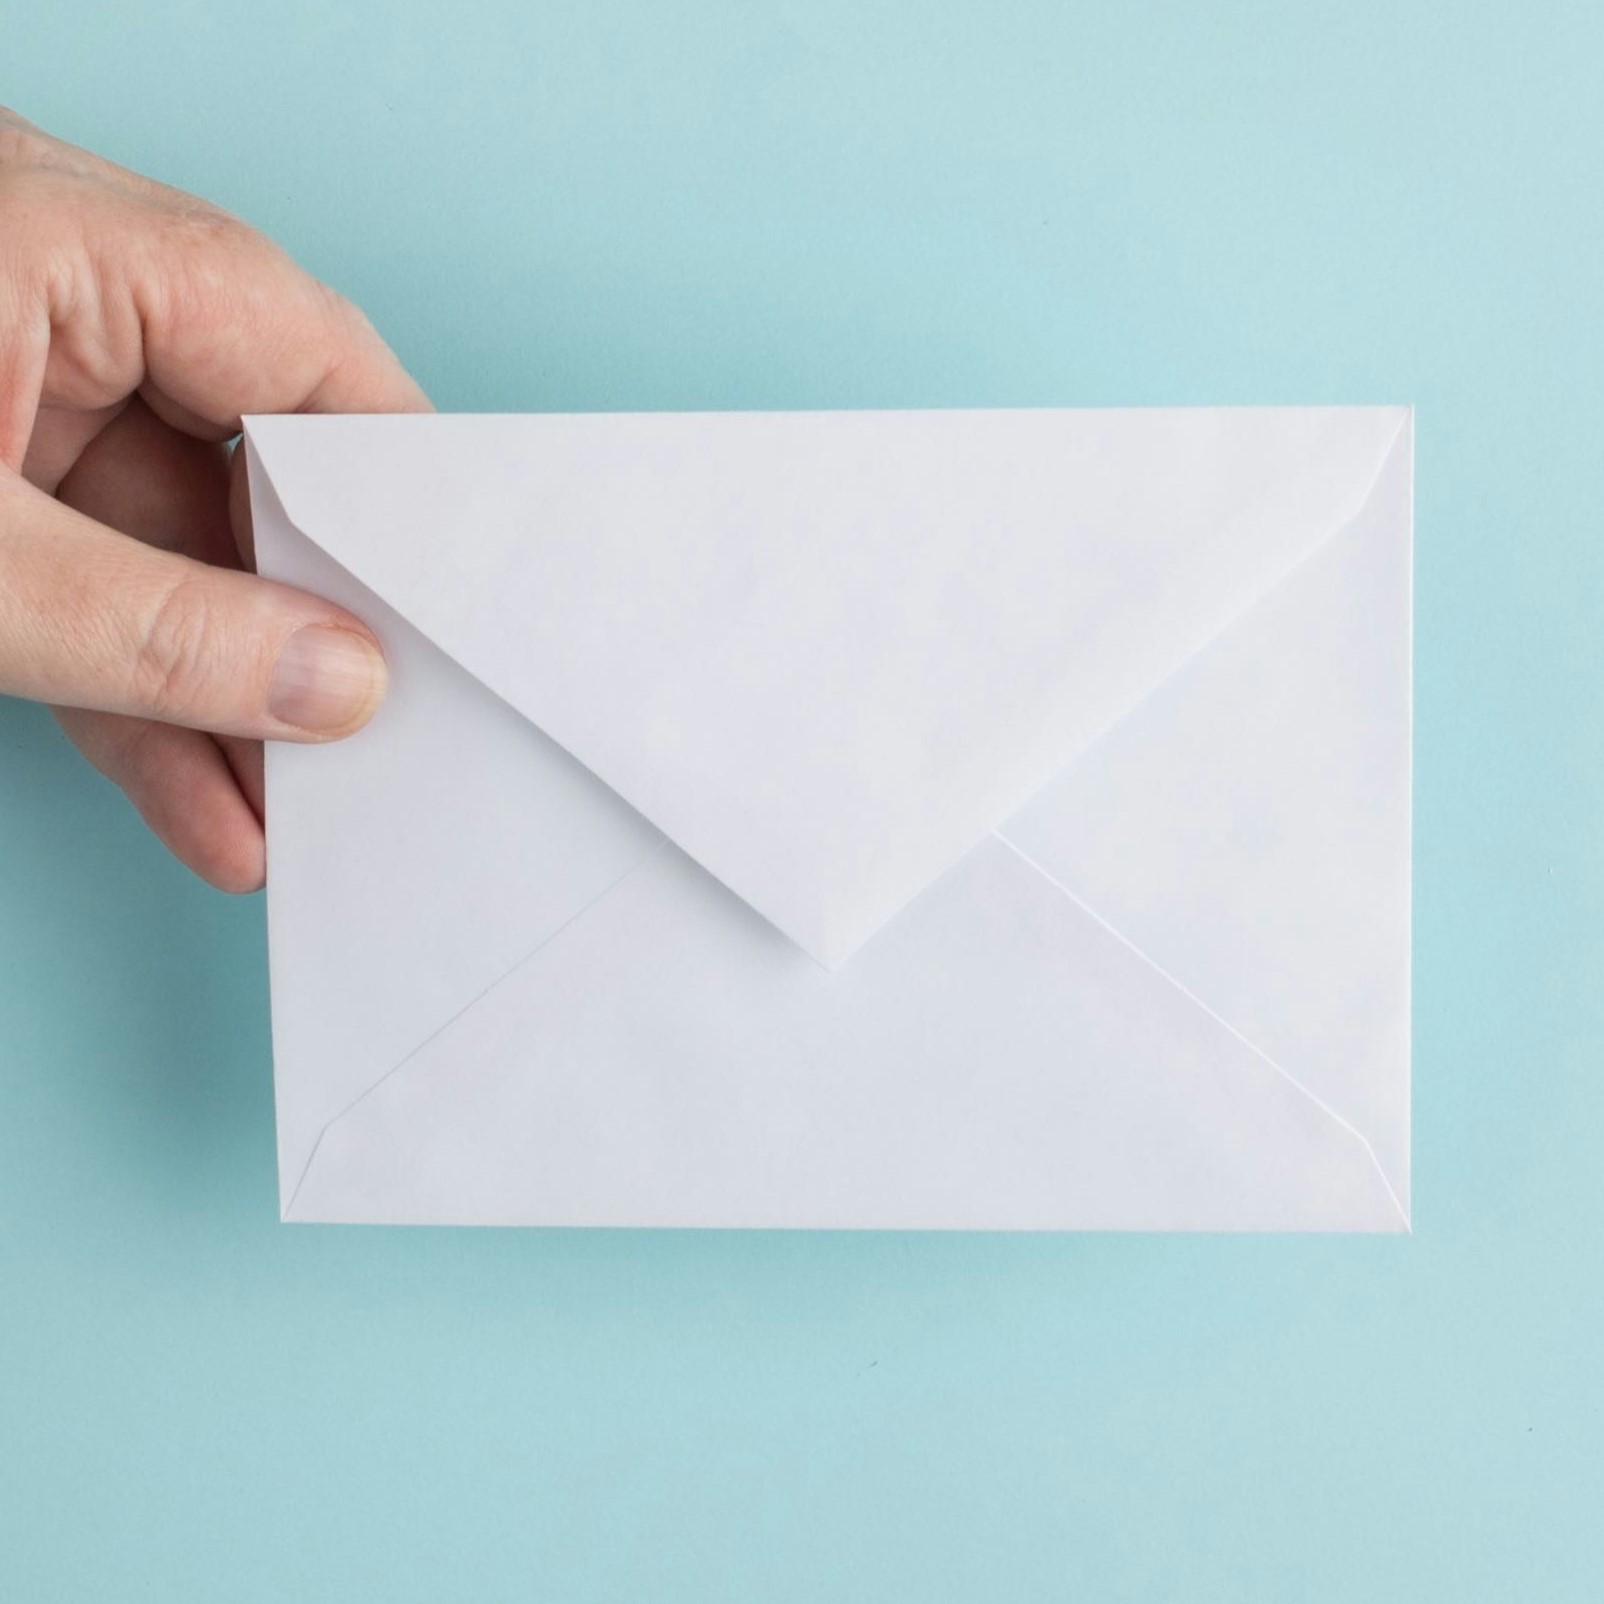 Hand holding an envelope against a pale blue background